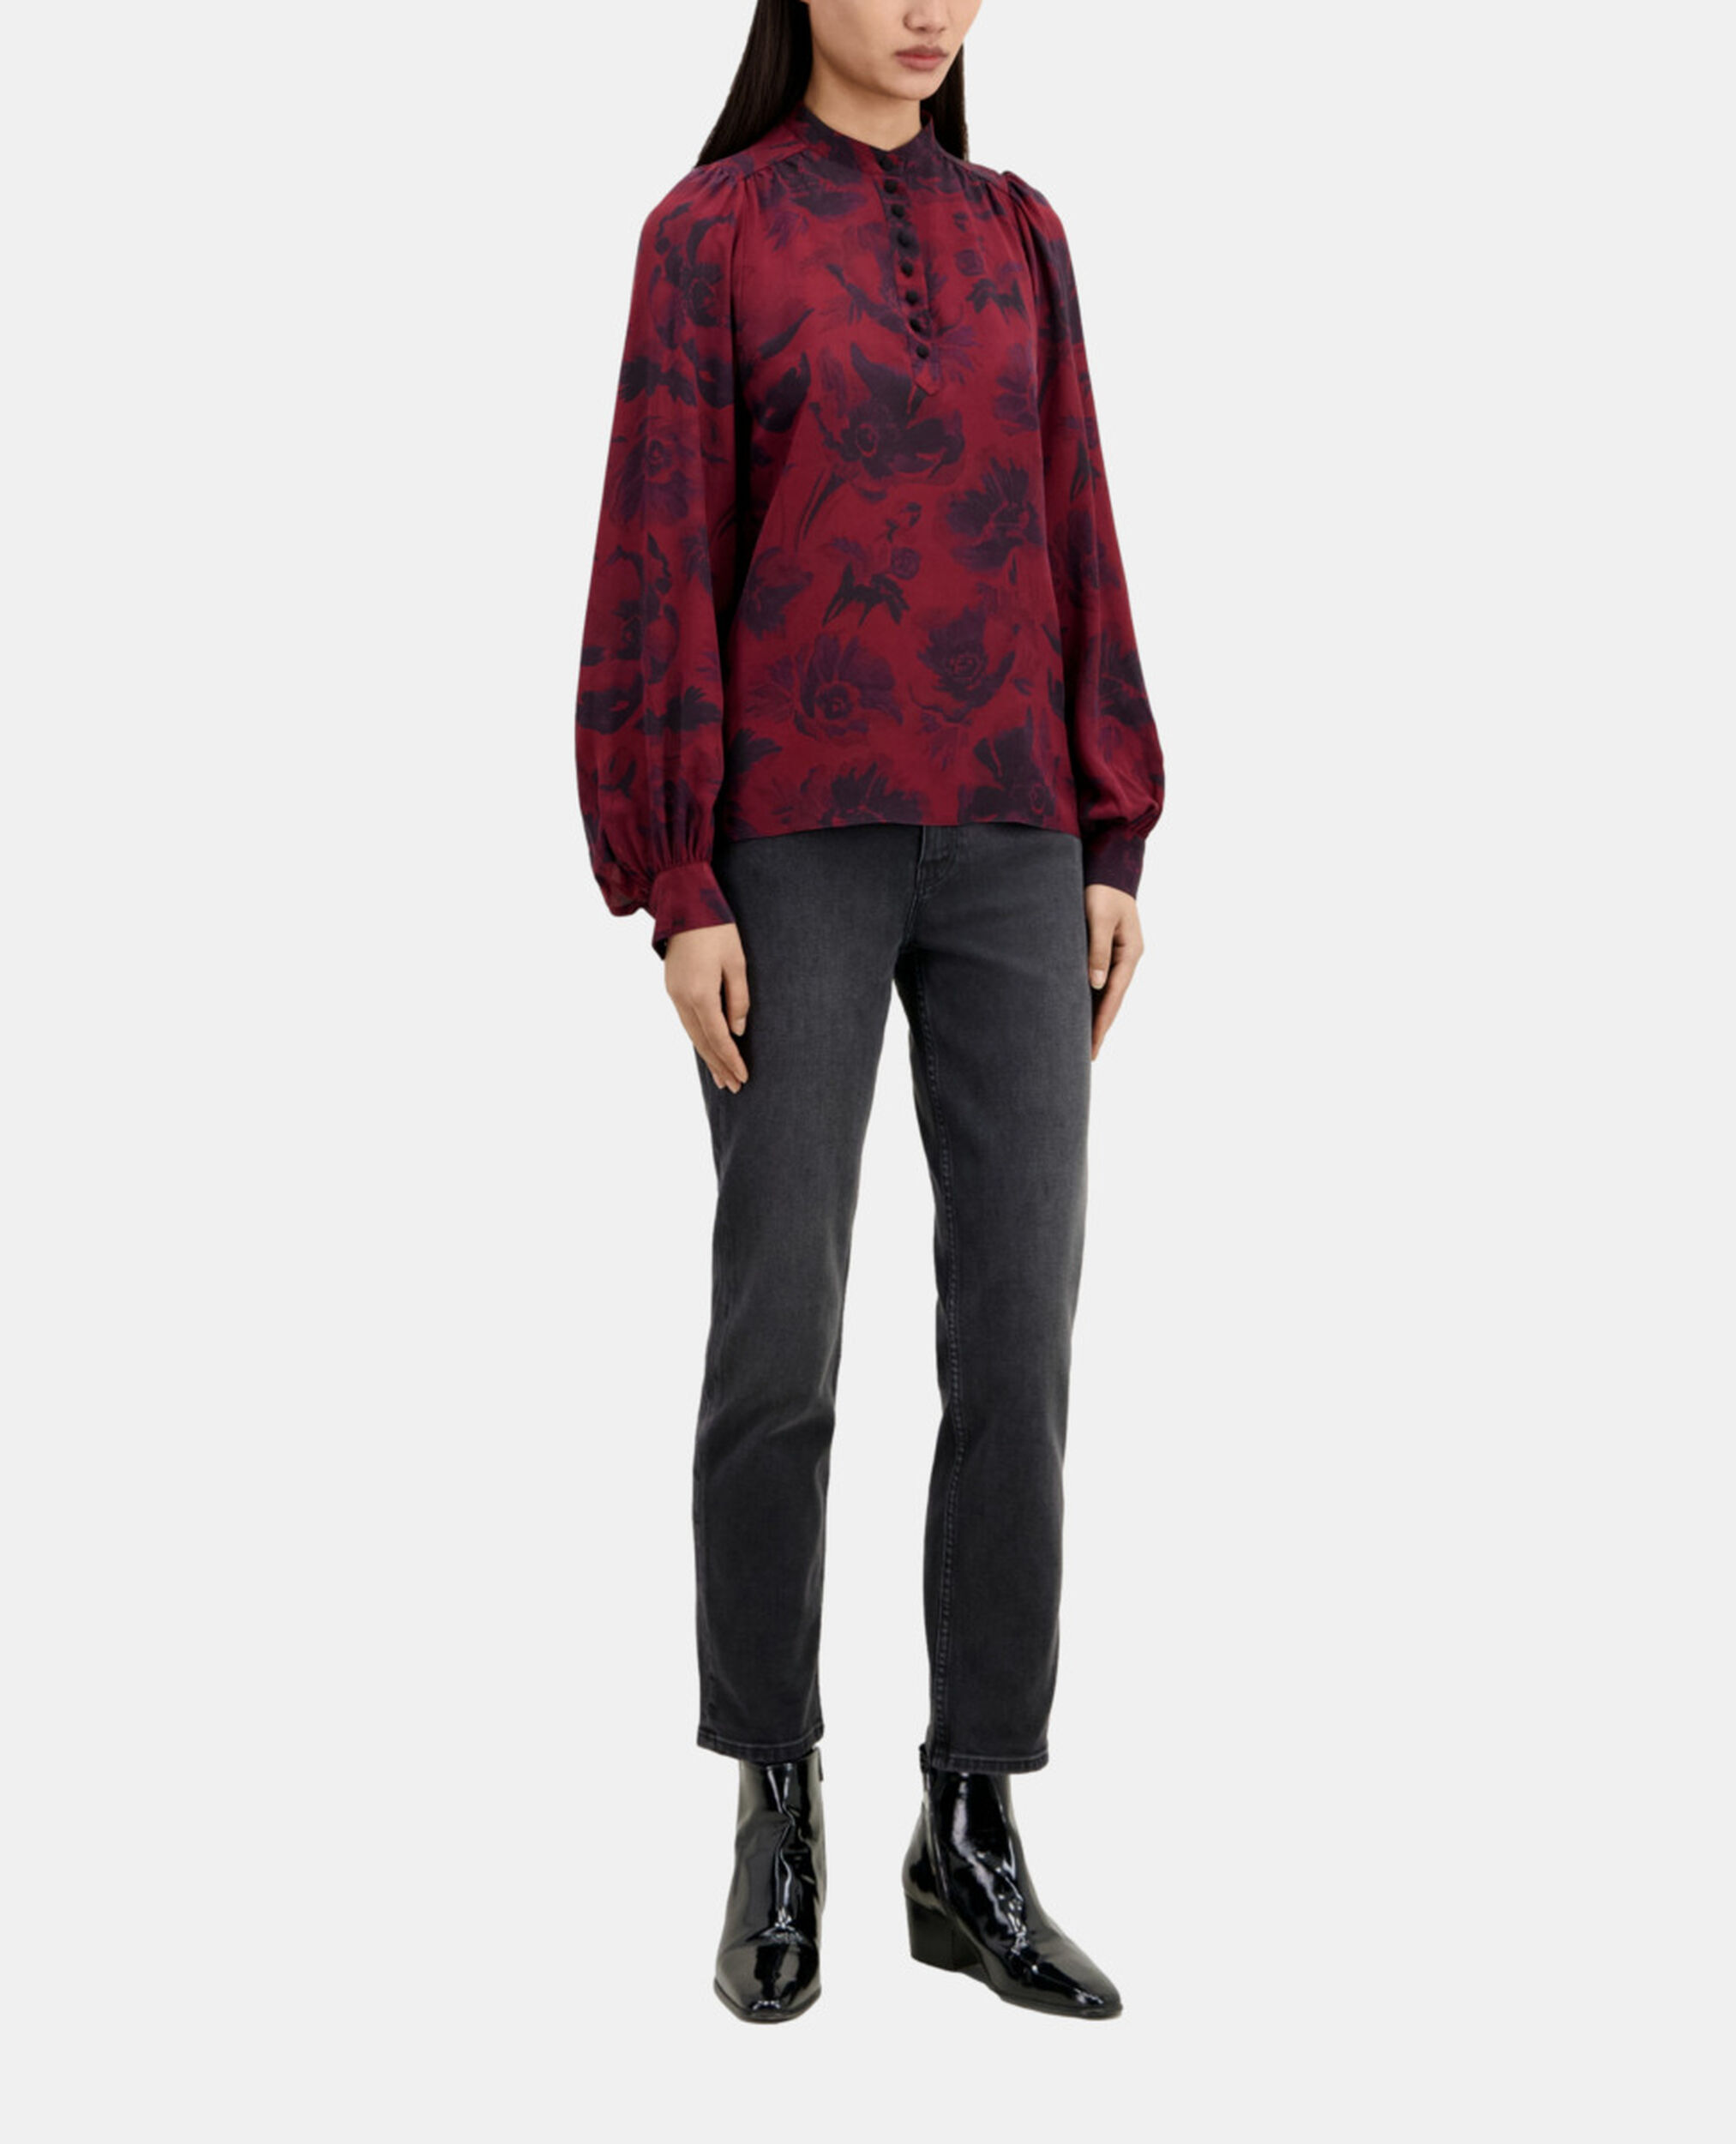 Printed top with buttoning, BLACK - BURGUNDY, hi-res image number null